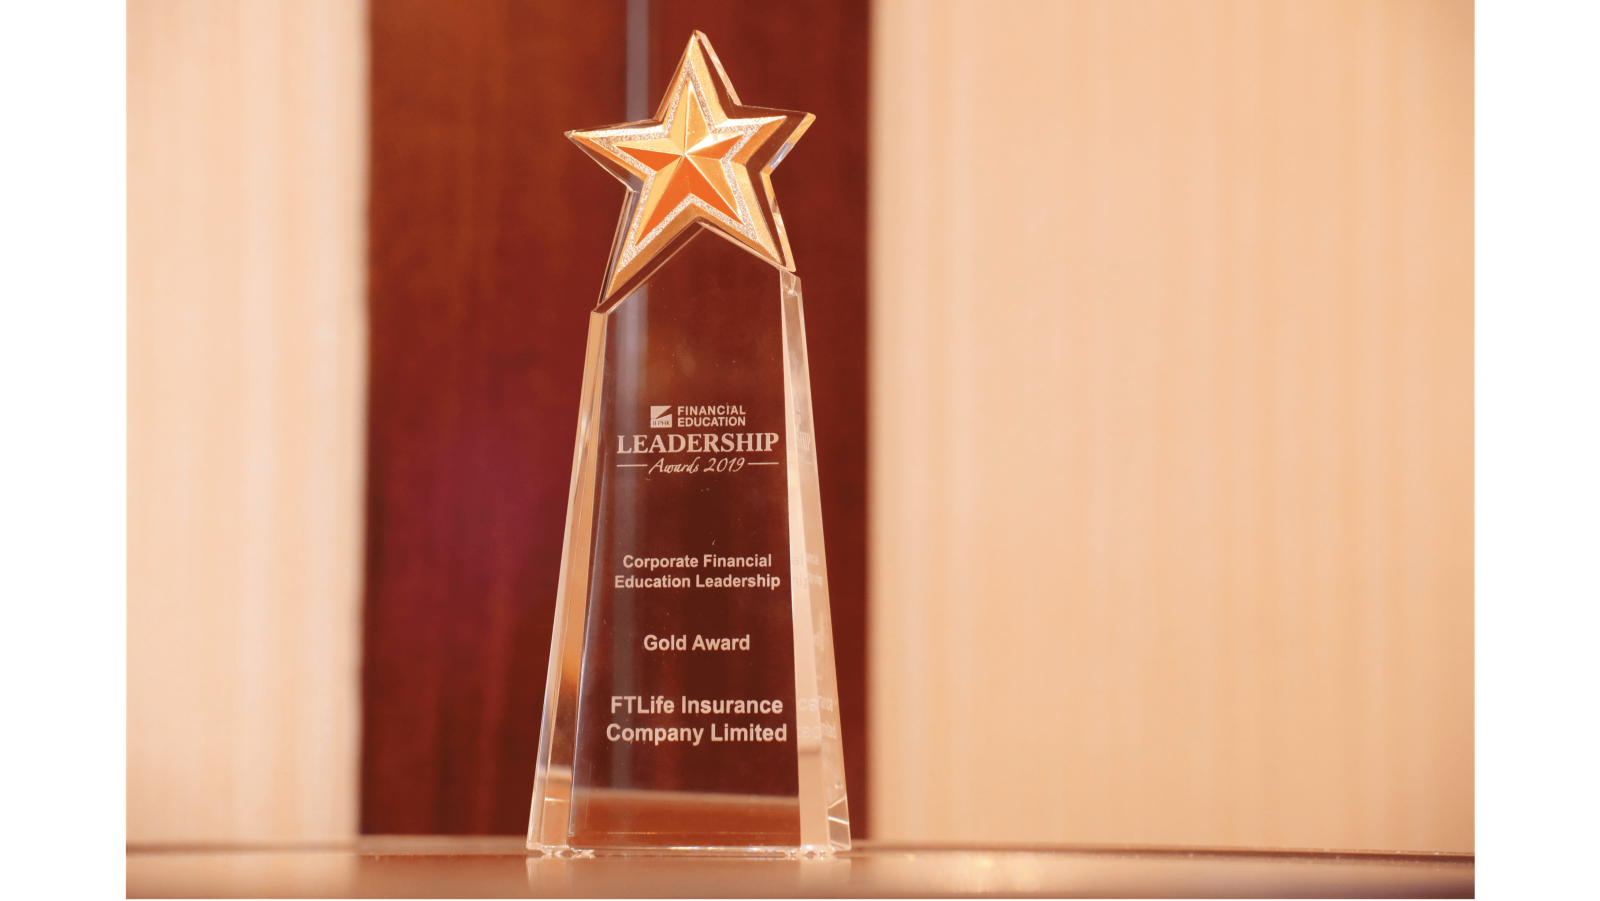  FTLife scooped up IFPHK Corporate Financial Education Leadership Award (Gold)